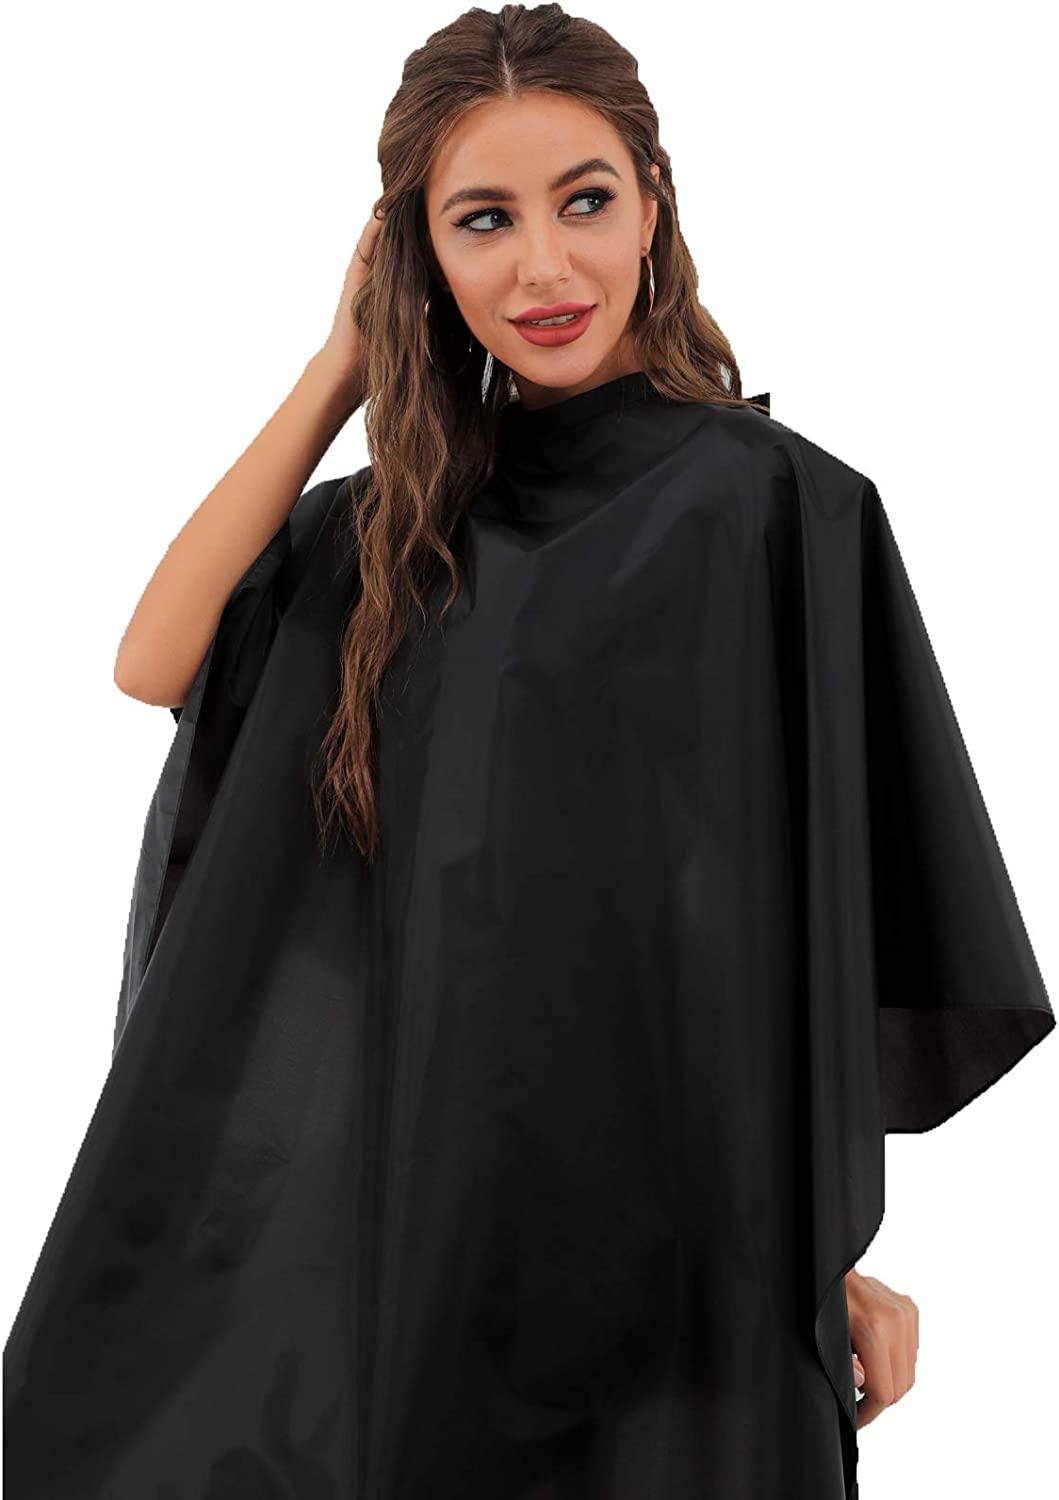 BSFHH Black Barber Cape, Professional Nylon Waterproof Hair Cutting Cape  with Snap Closure Salon Cape, 59 x 47 Hairdressing Cape (5 Pack)